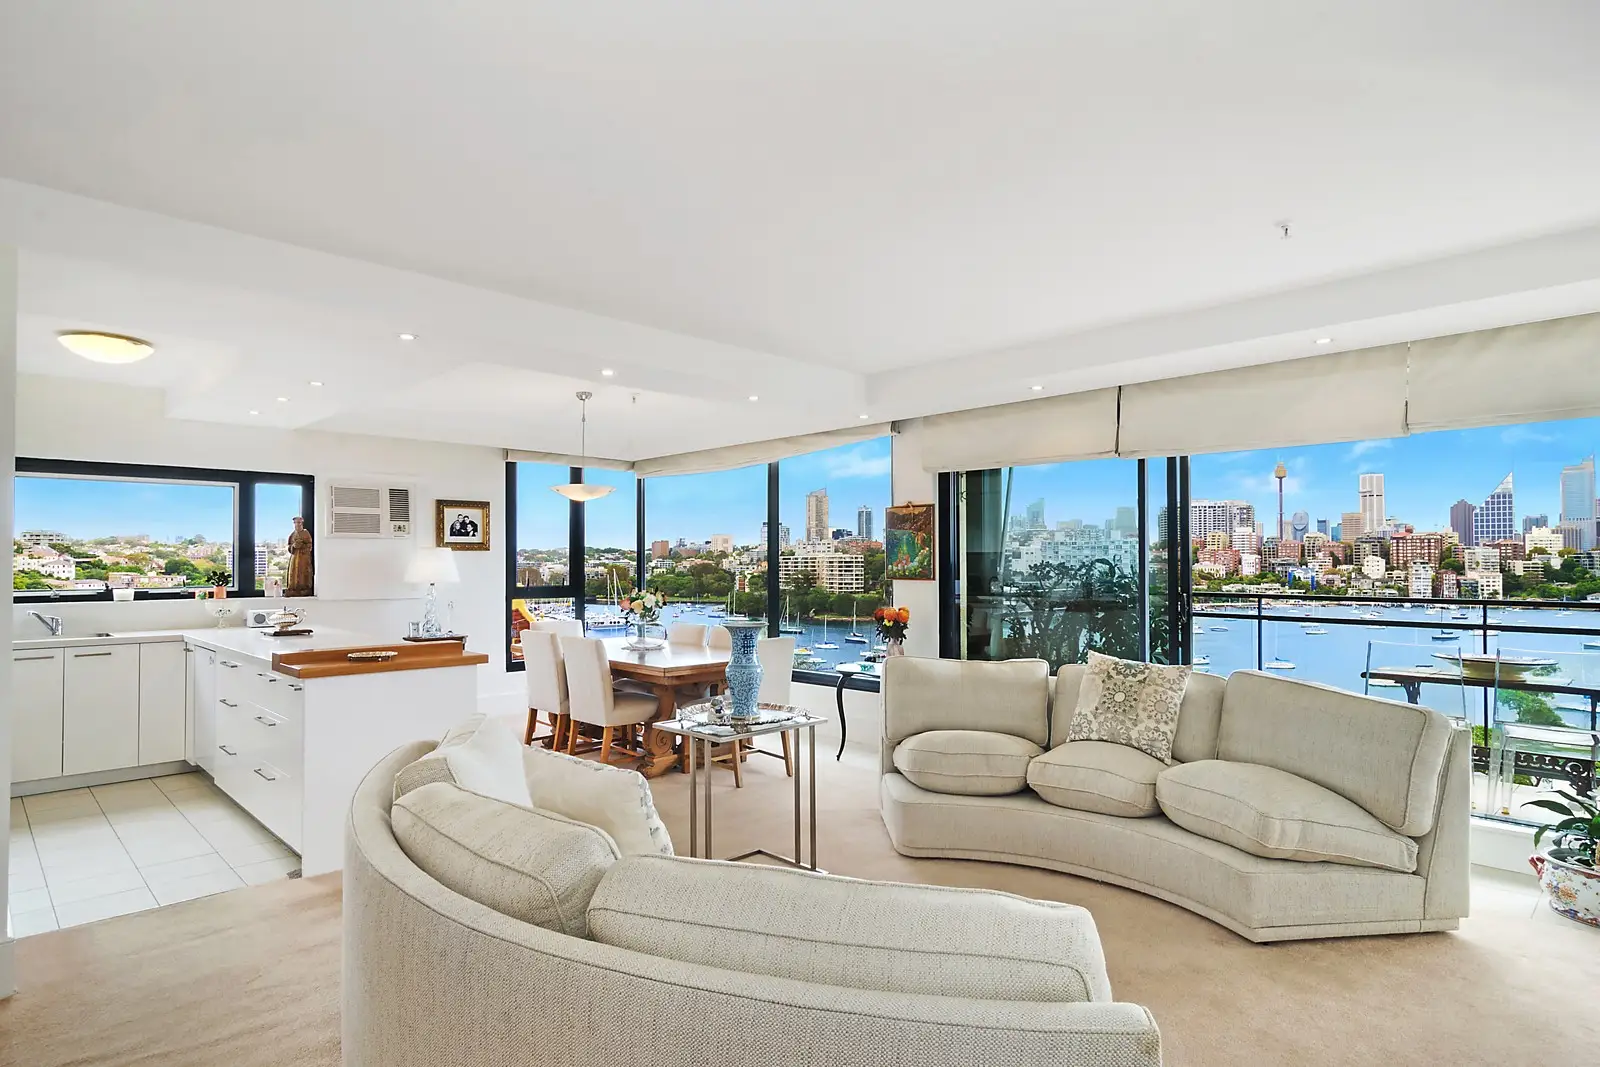 Photo #3: 3B/23 Thornton Street, Darling Point - Sold by Sydney Sotheby's International Realty